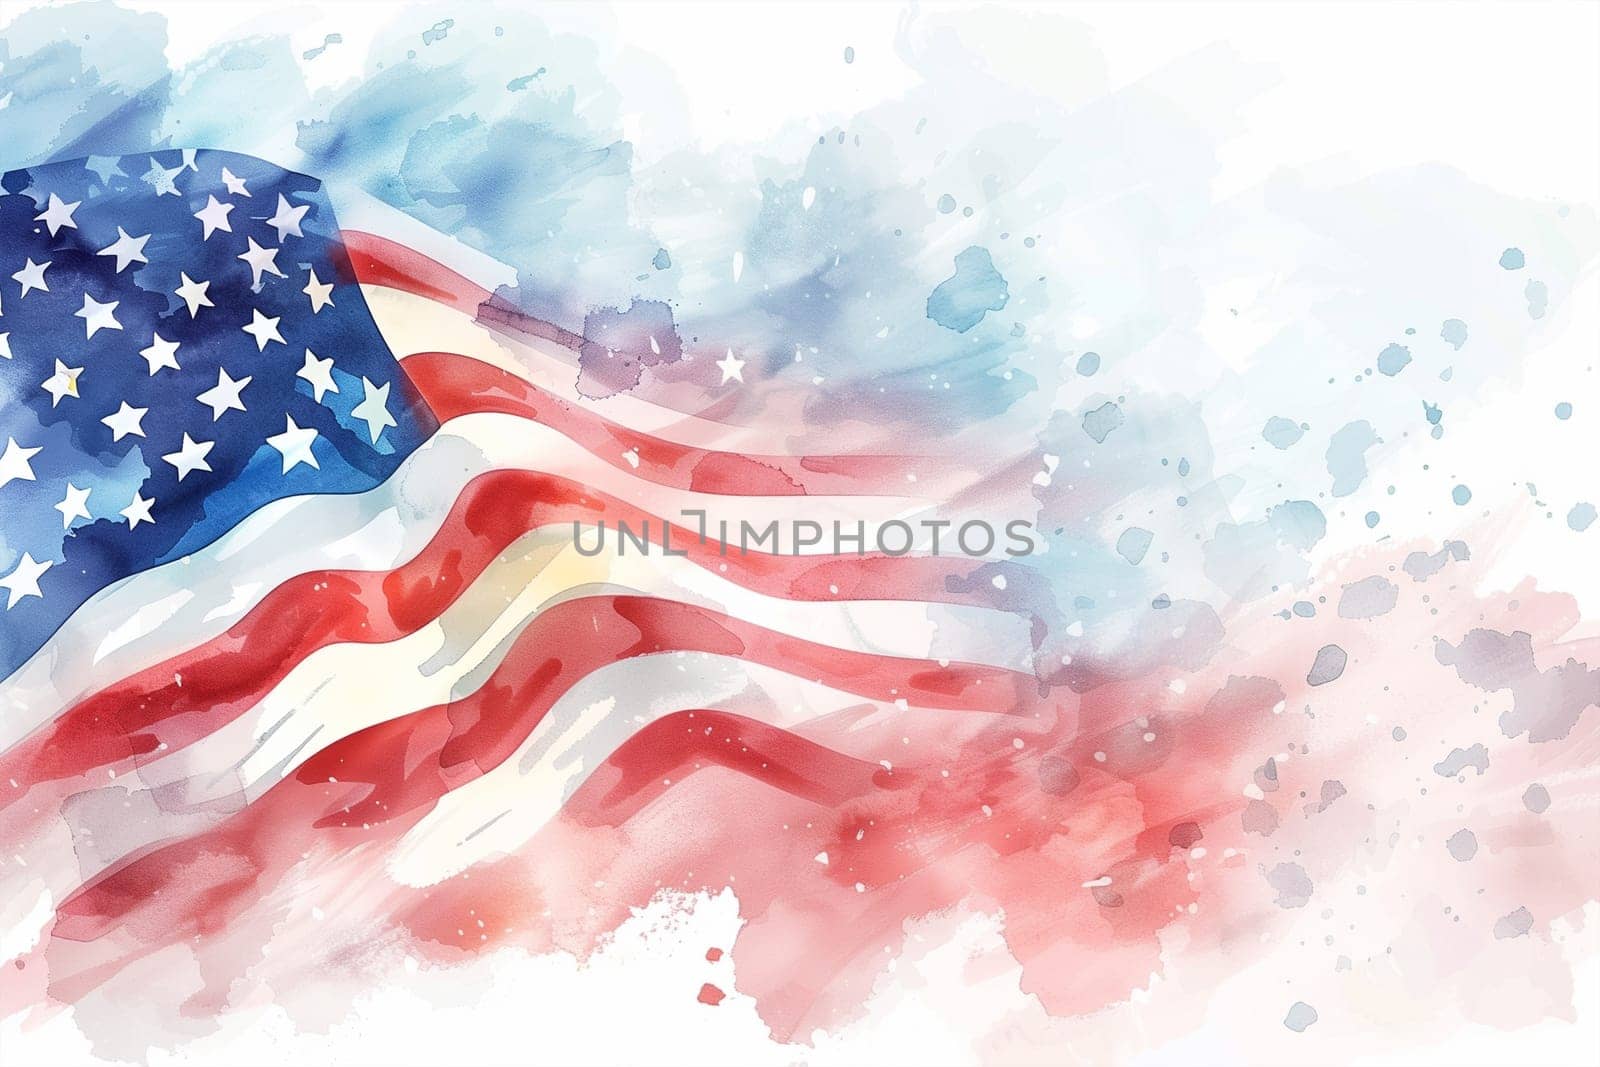 American Flag Painted on White Background by Sd28DimoN_1976